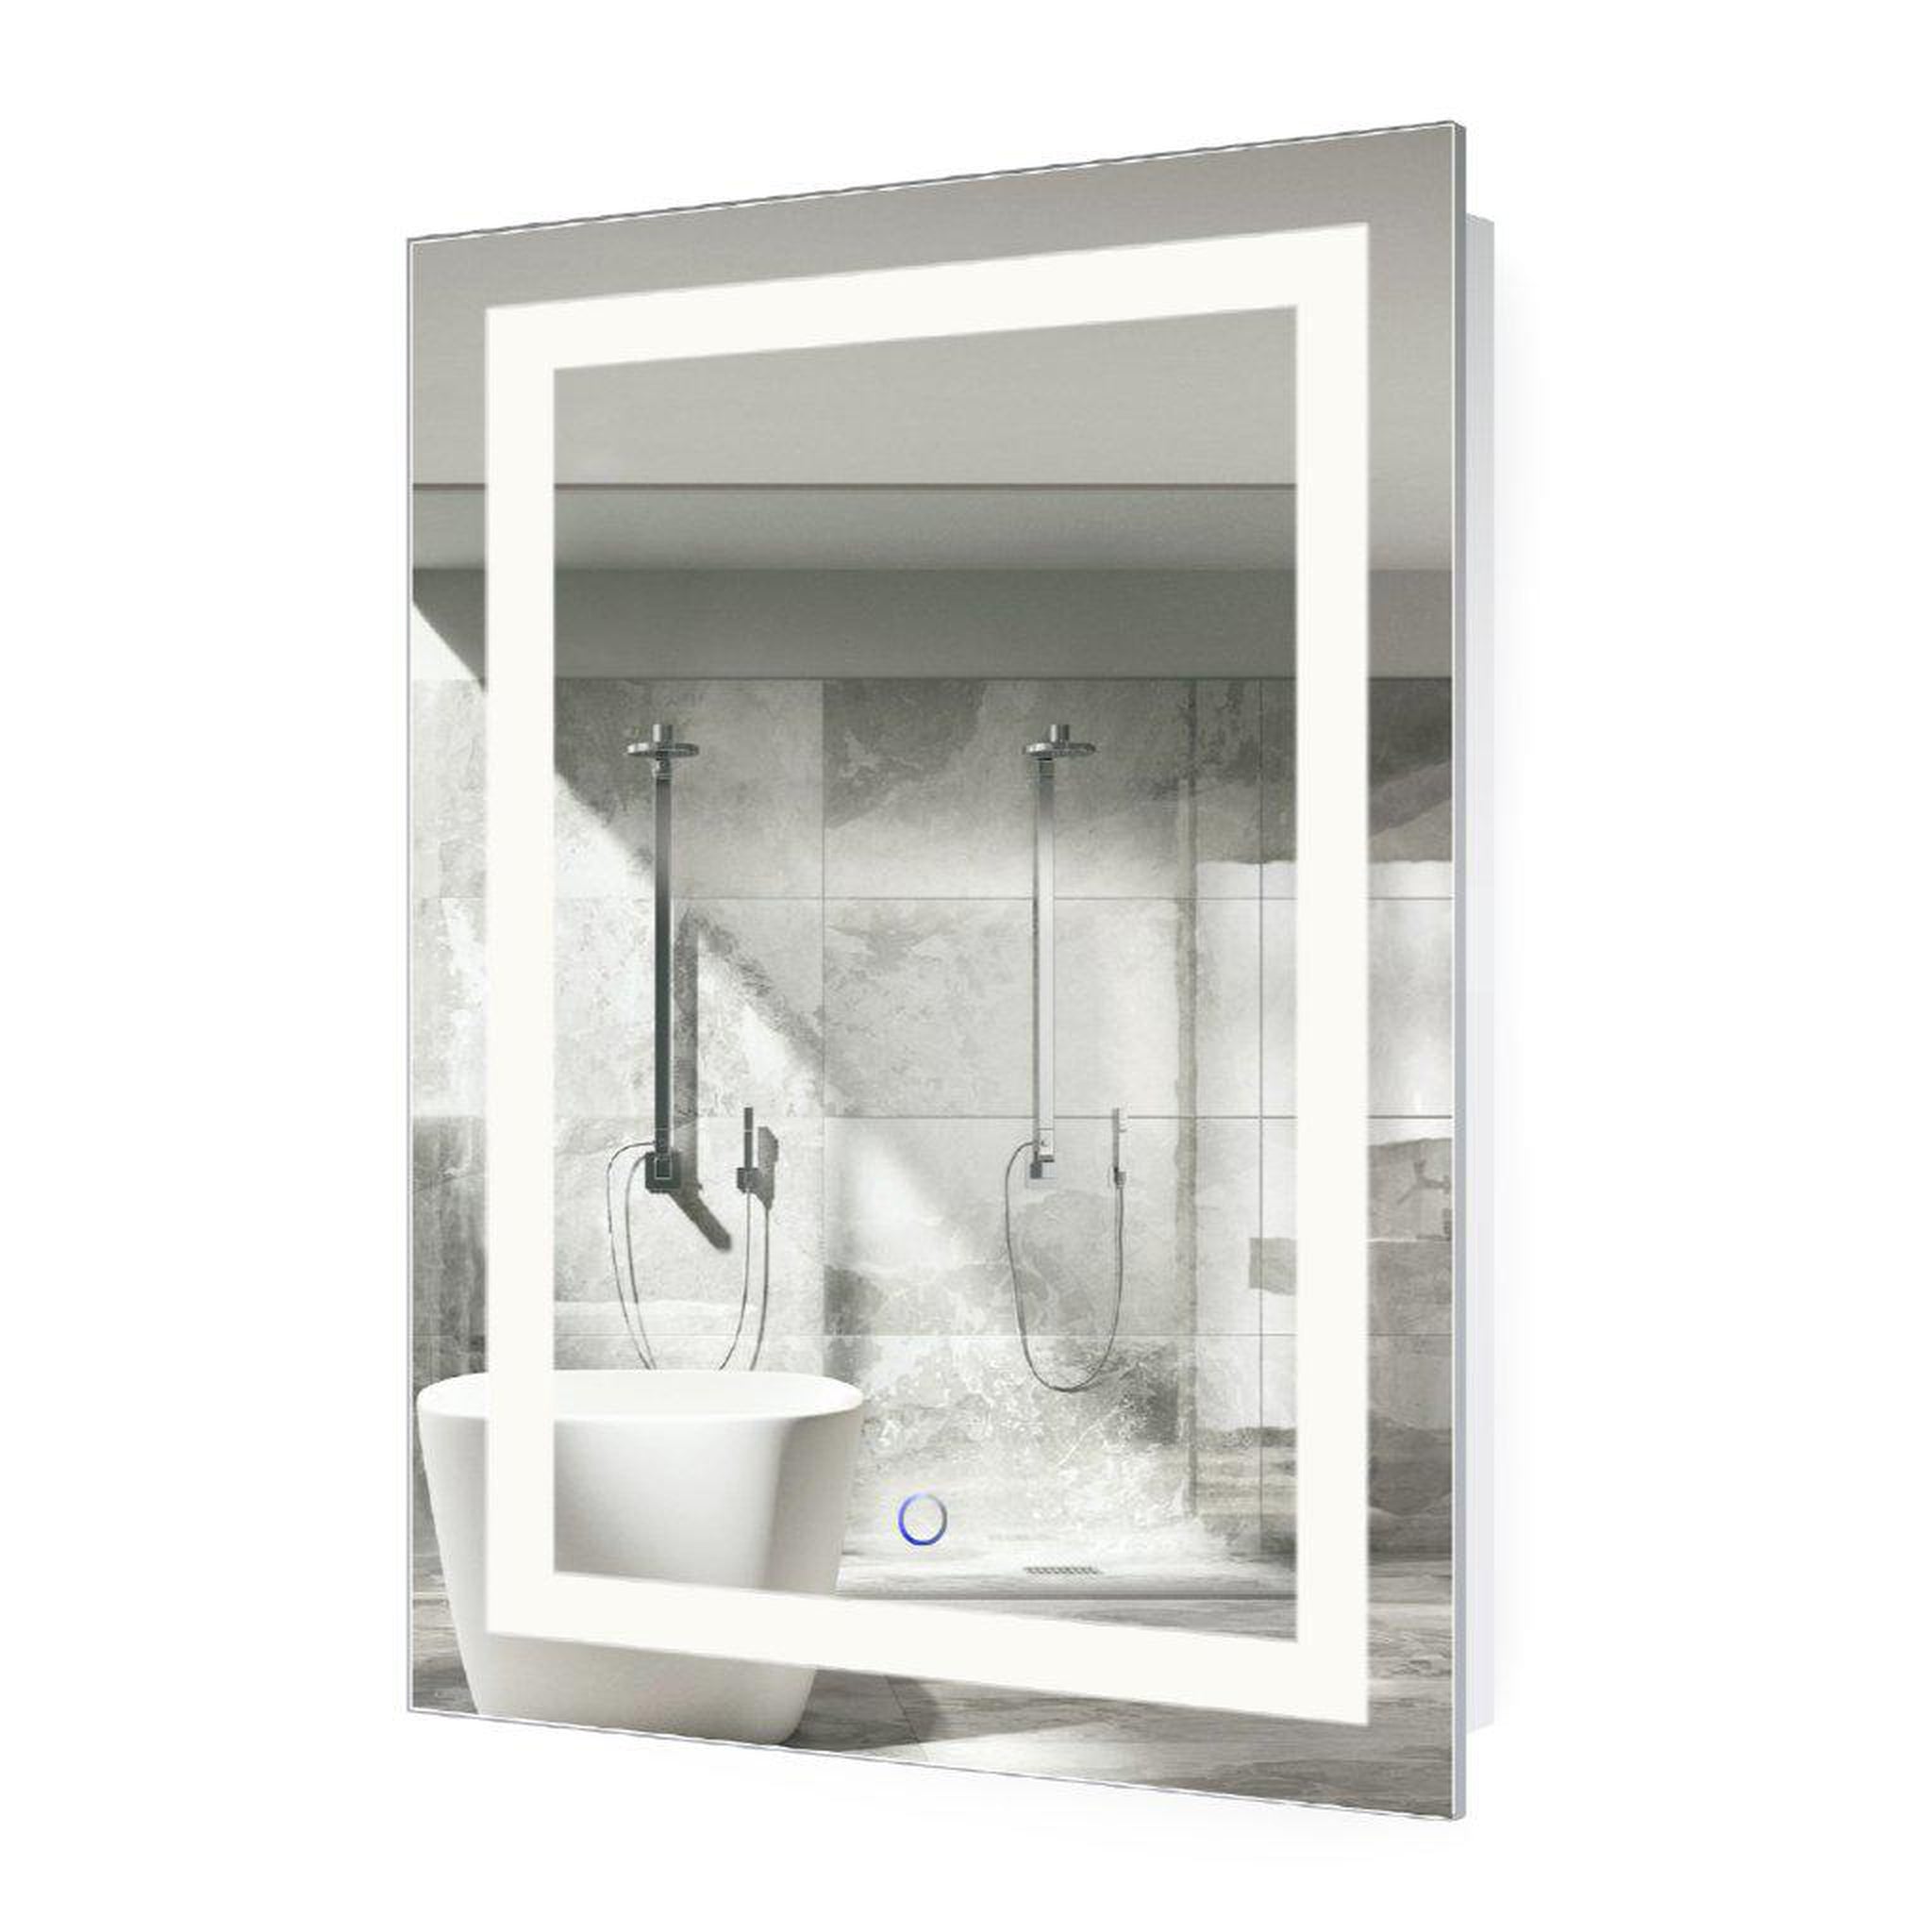 Krugg Reflections, Krugg Reflections Icon 36" x 24" 5000K Rectangular Wall-Mounted Illuminated Silver Backed LED Mirror With Built-in Defogger and Touch Sensor On/Off Built-in Dimmer